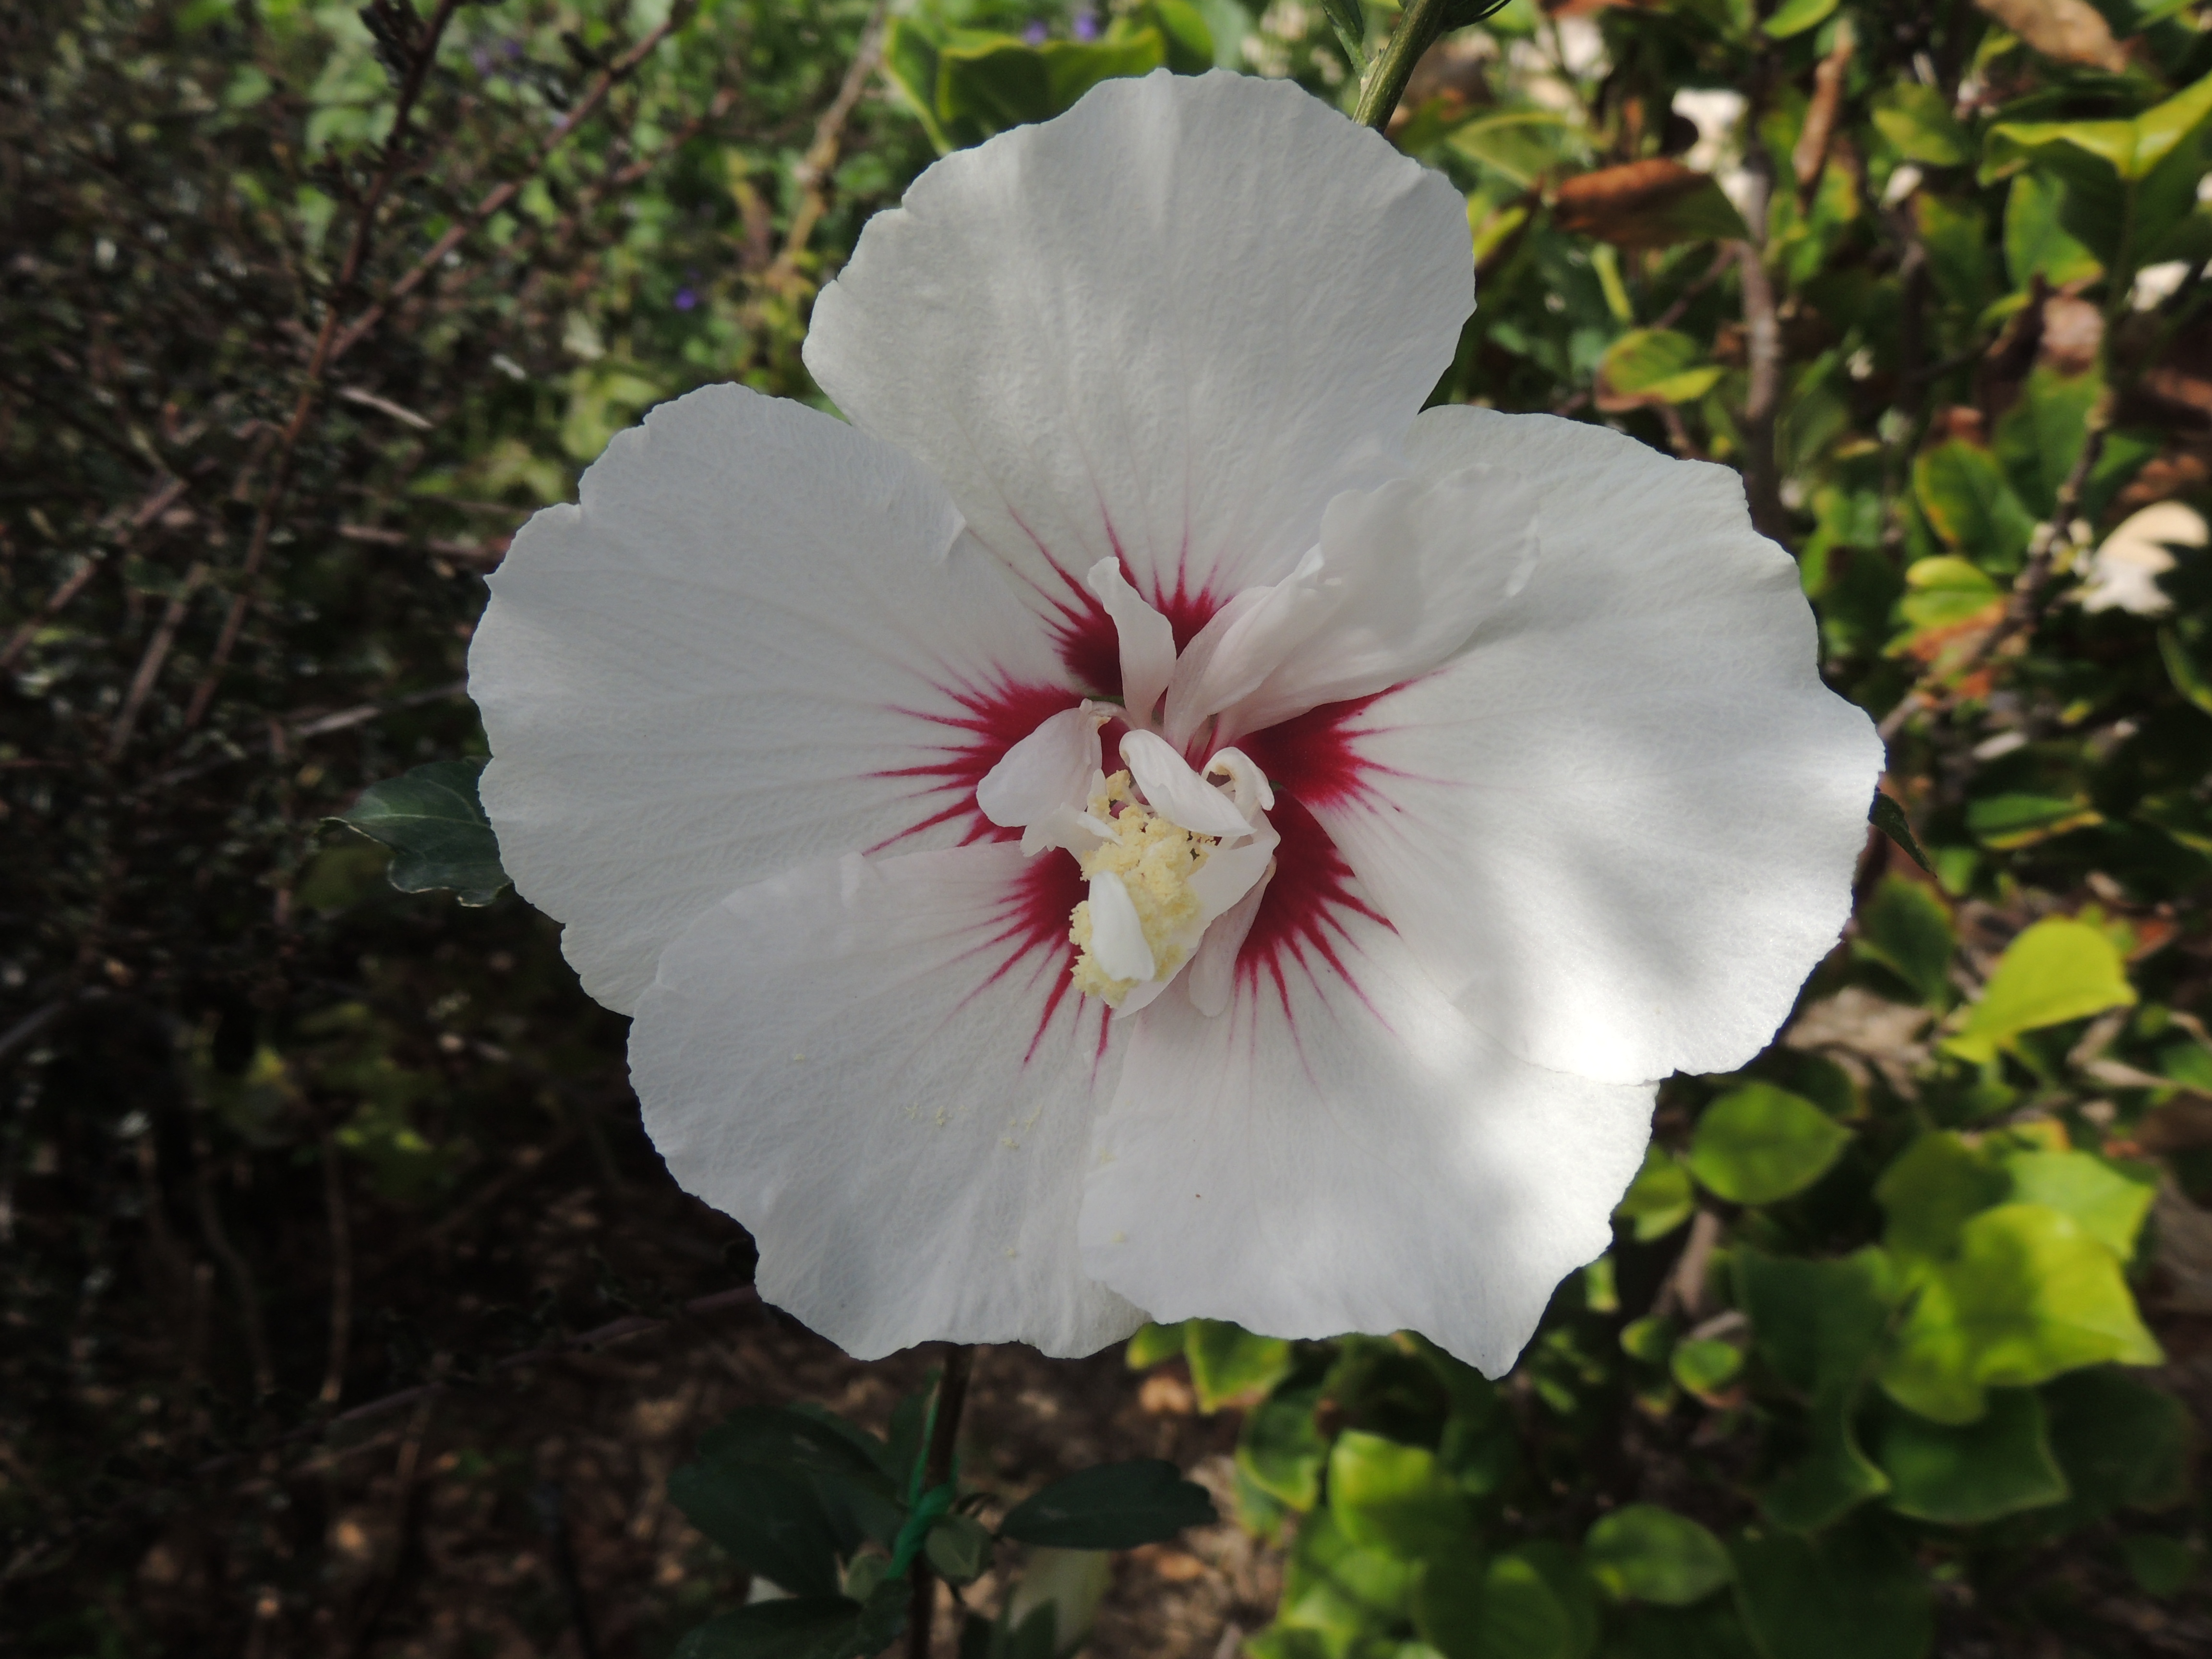 4. The flower of a new Hibiscus Syriacus.